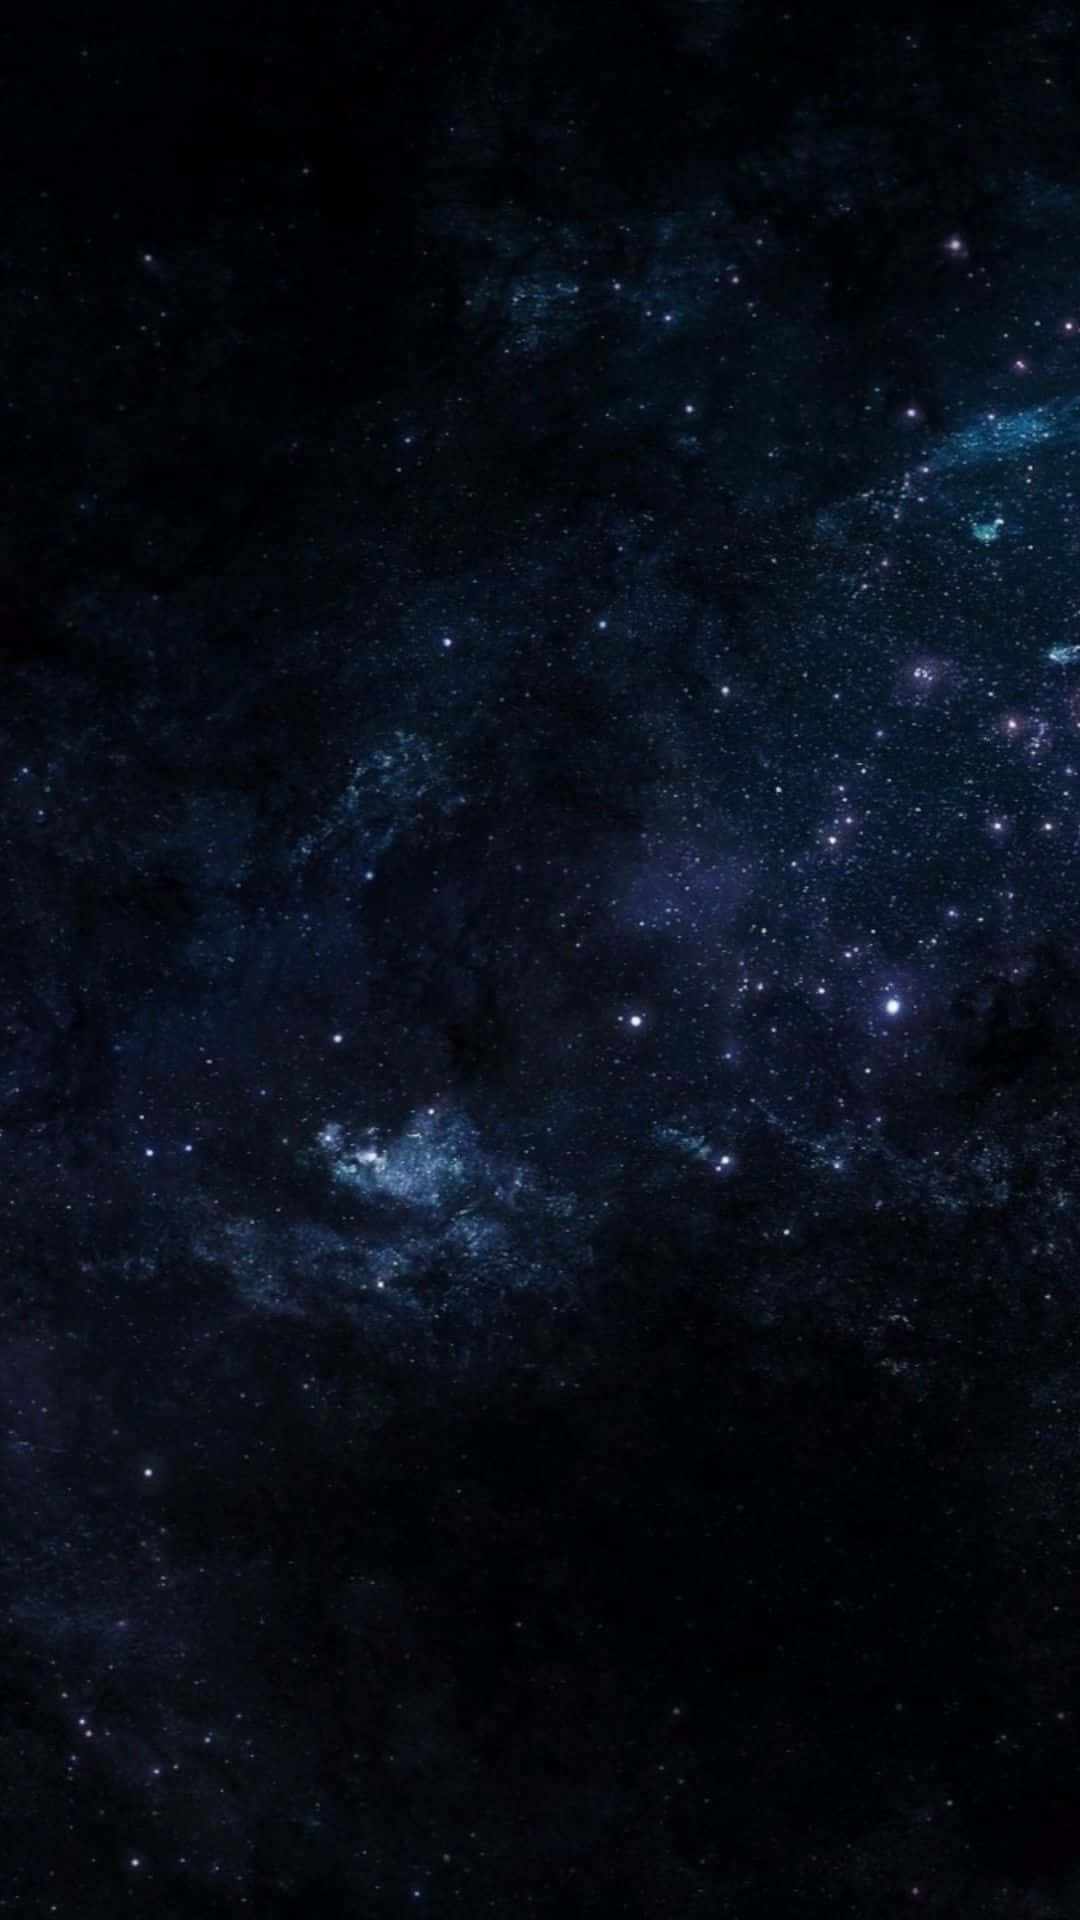 "Explore a World Beyond Your Reach with Android Space" Wallpaper